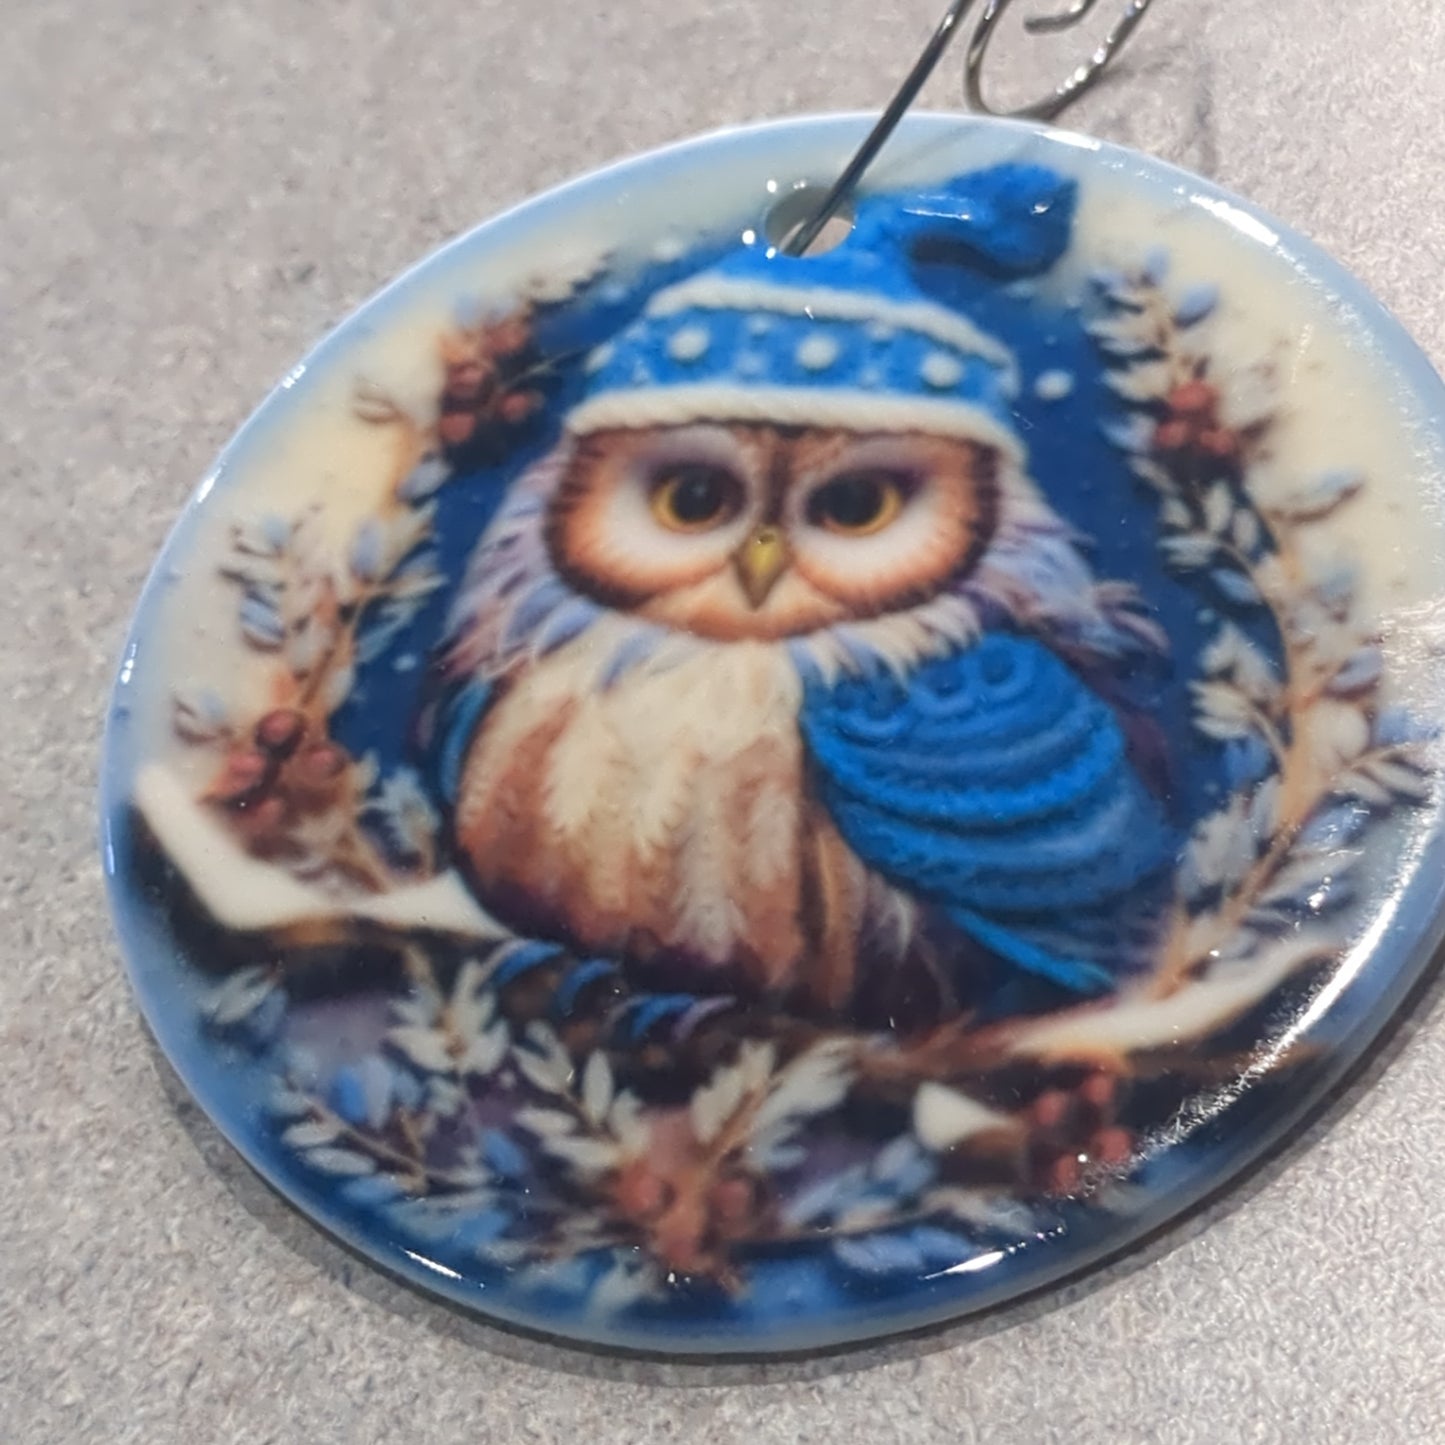 Ceramic ornament with an owl in a dark blue hat and blue scarf, it appears 3D but it is not